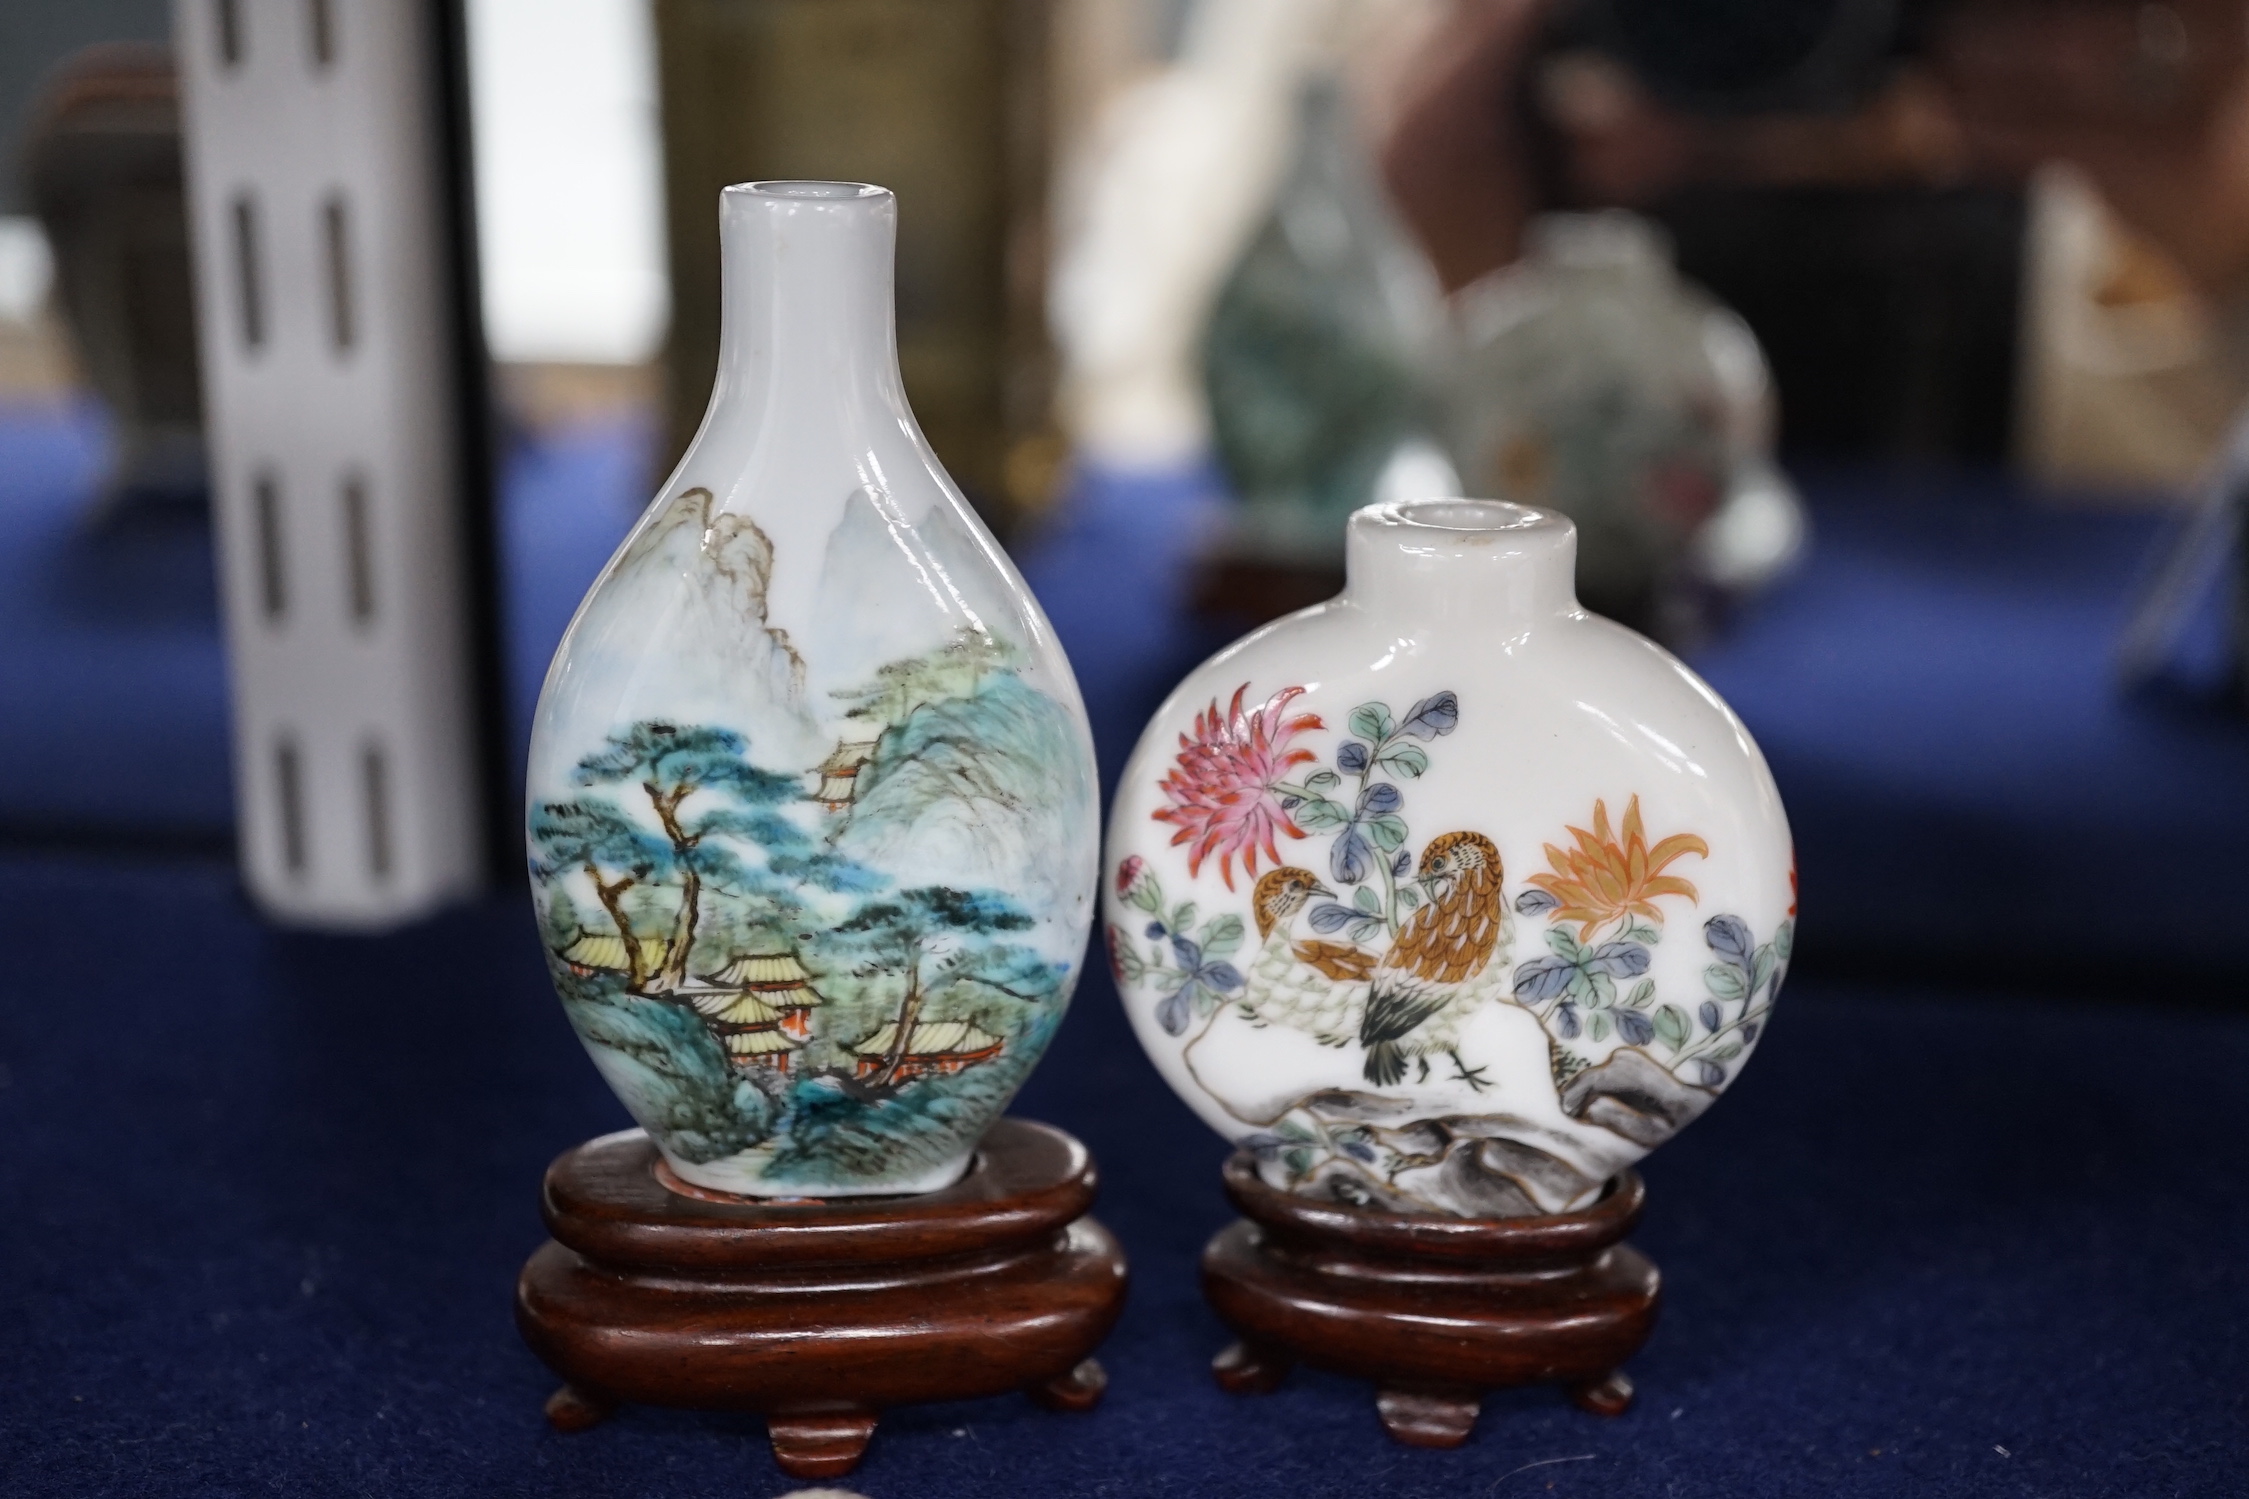 Four Chinese enamelled porcelain snuff bottles, Qing and later